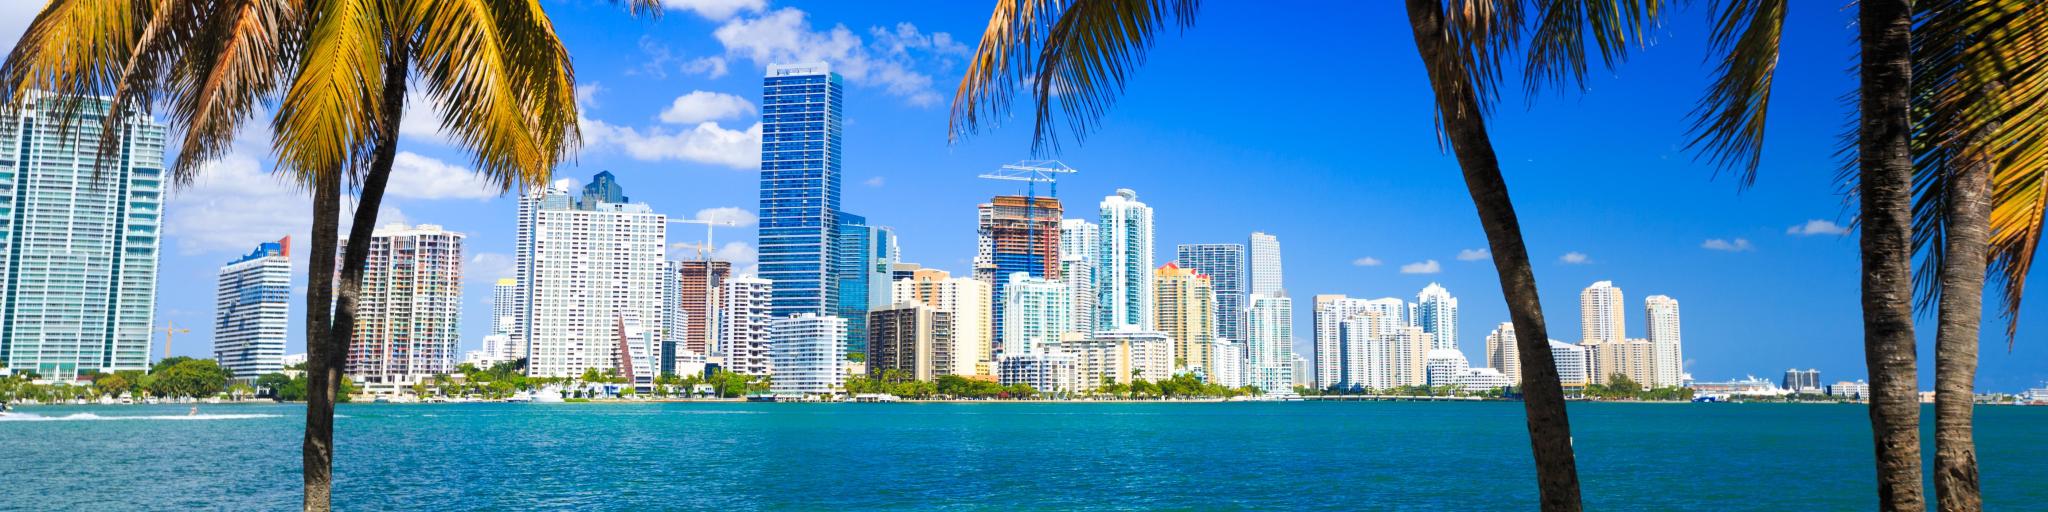 Miami, Florida, USA with a skyline view of the city, palm trees and sea in the foreground. 